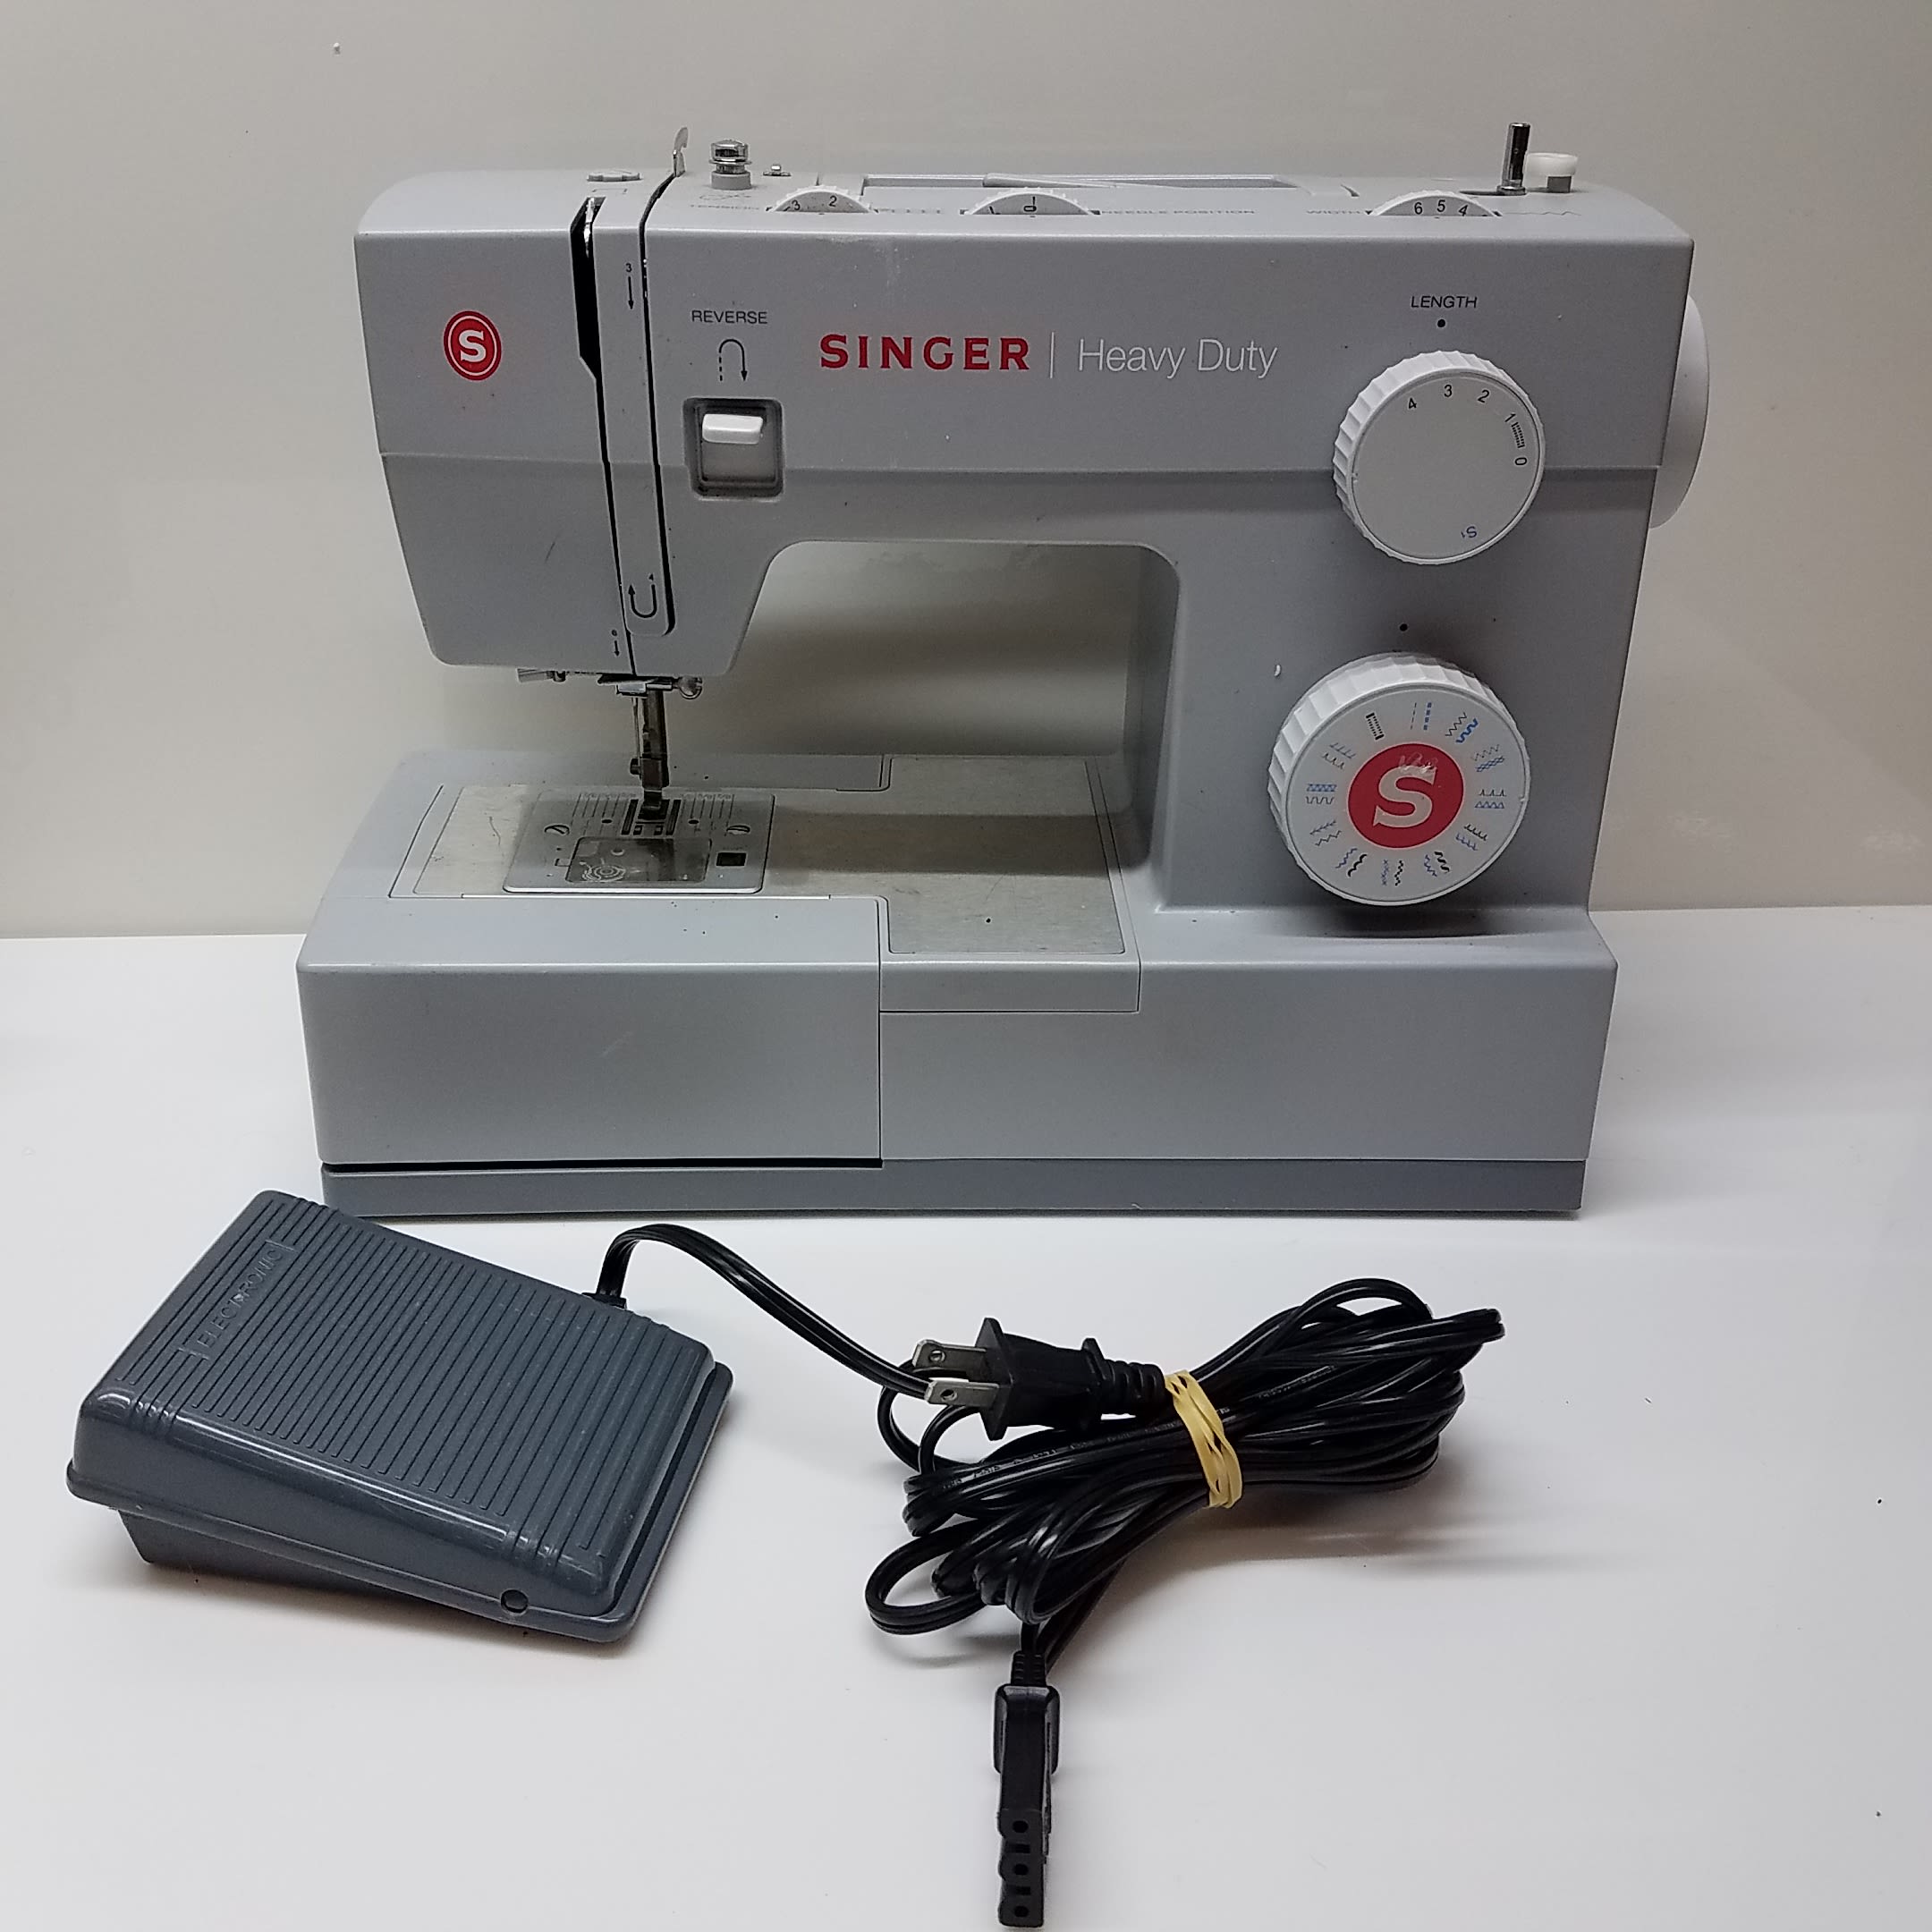 Unboxing SINGER 4423 HEAVY DUTY sewing machine